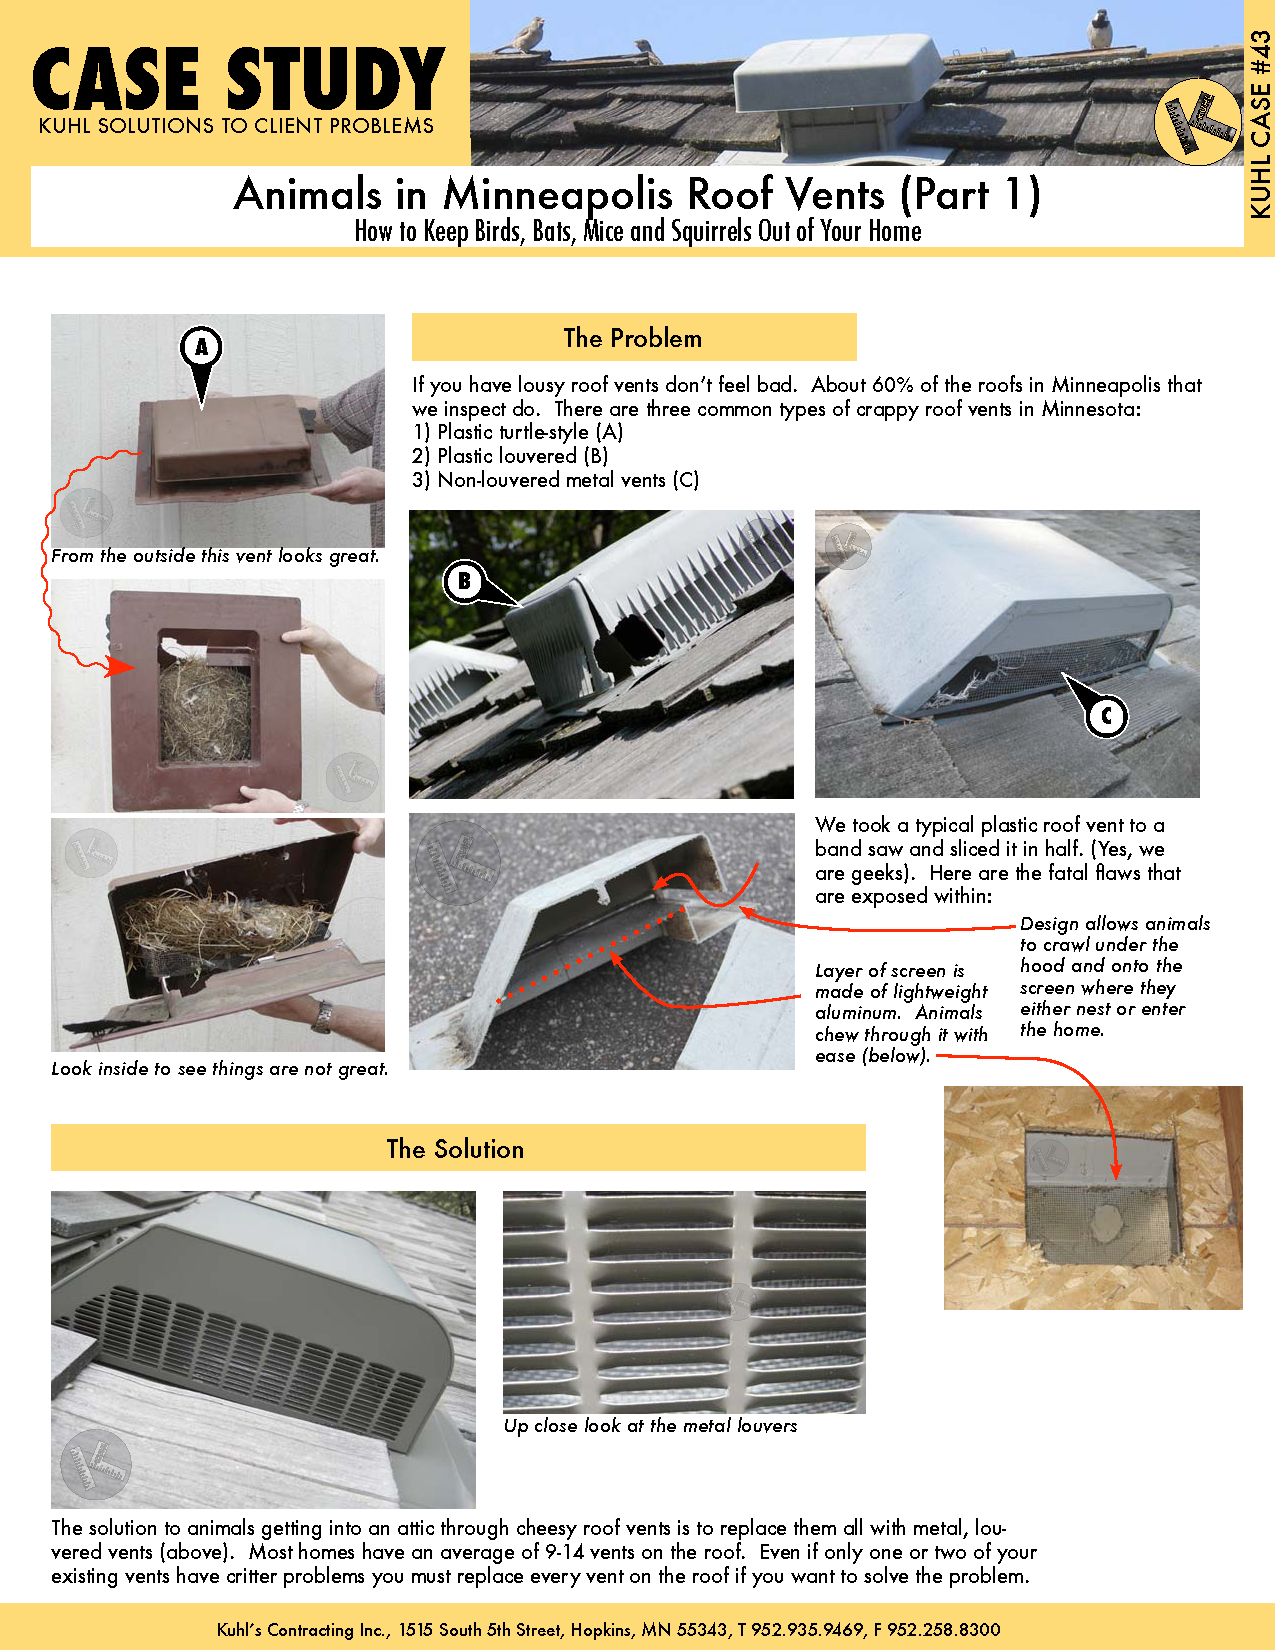 Animals in Minneapolis Roof Vents (Part 1): How to Keep Critters Out of Your Home